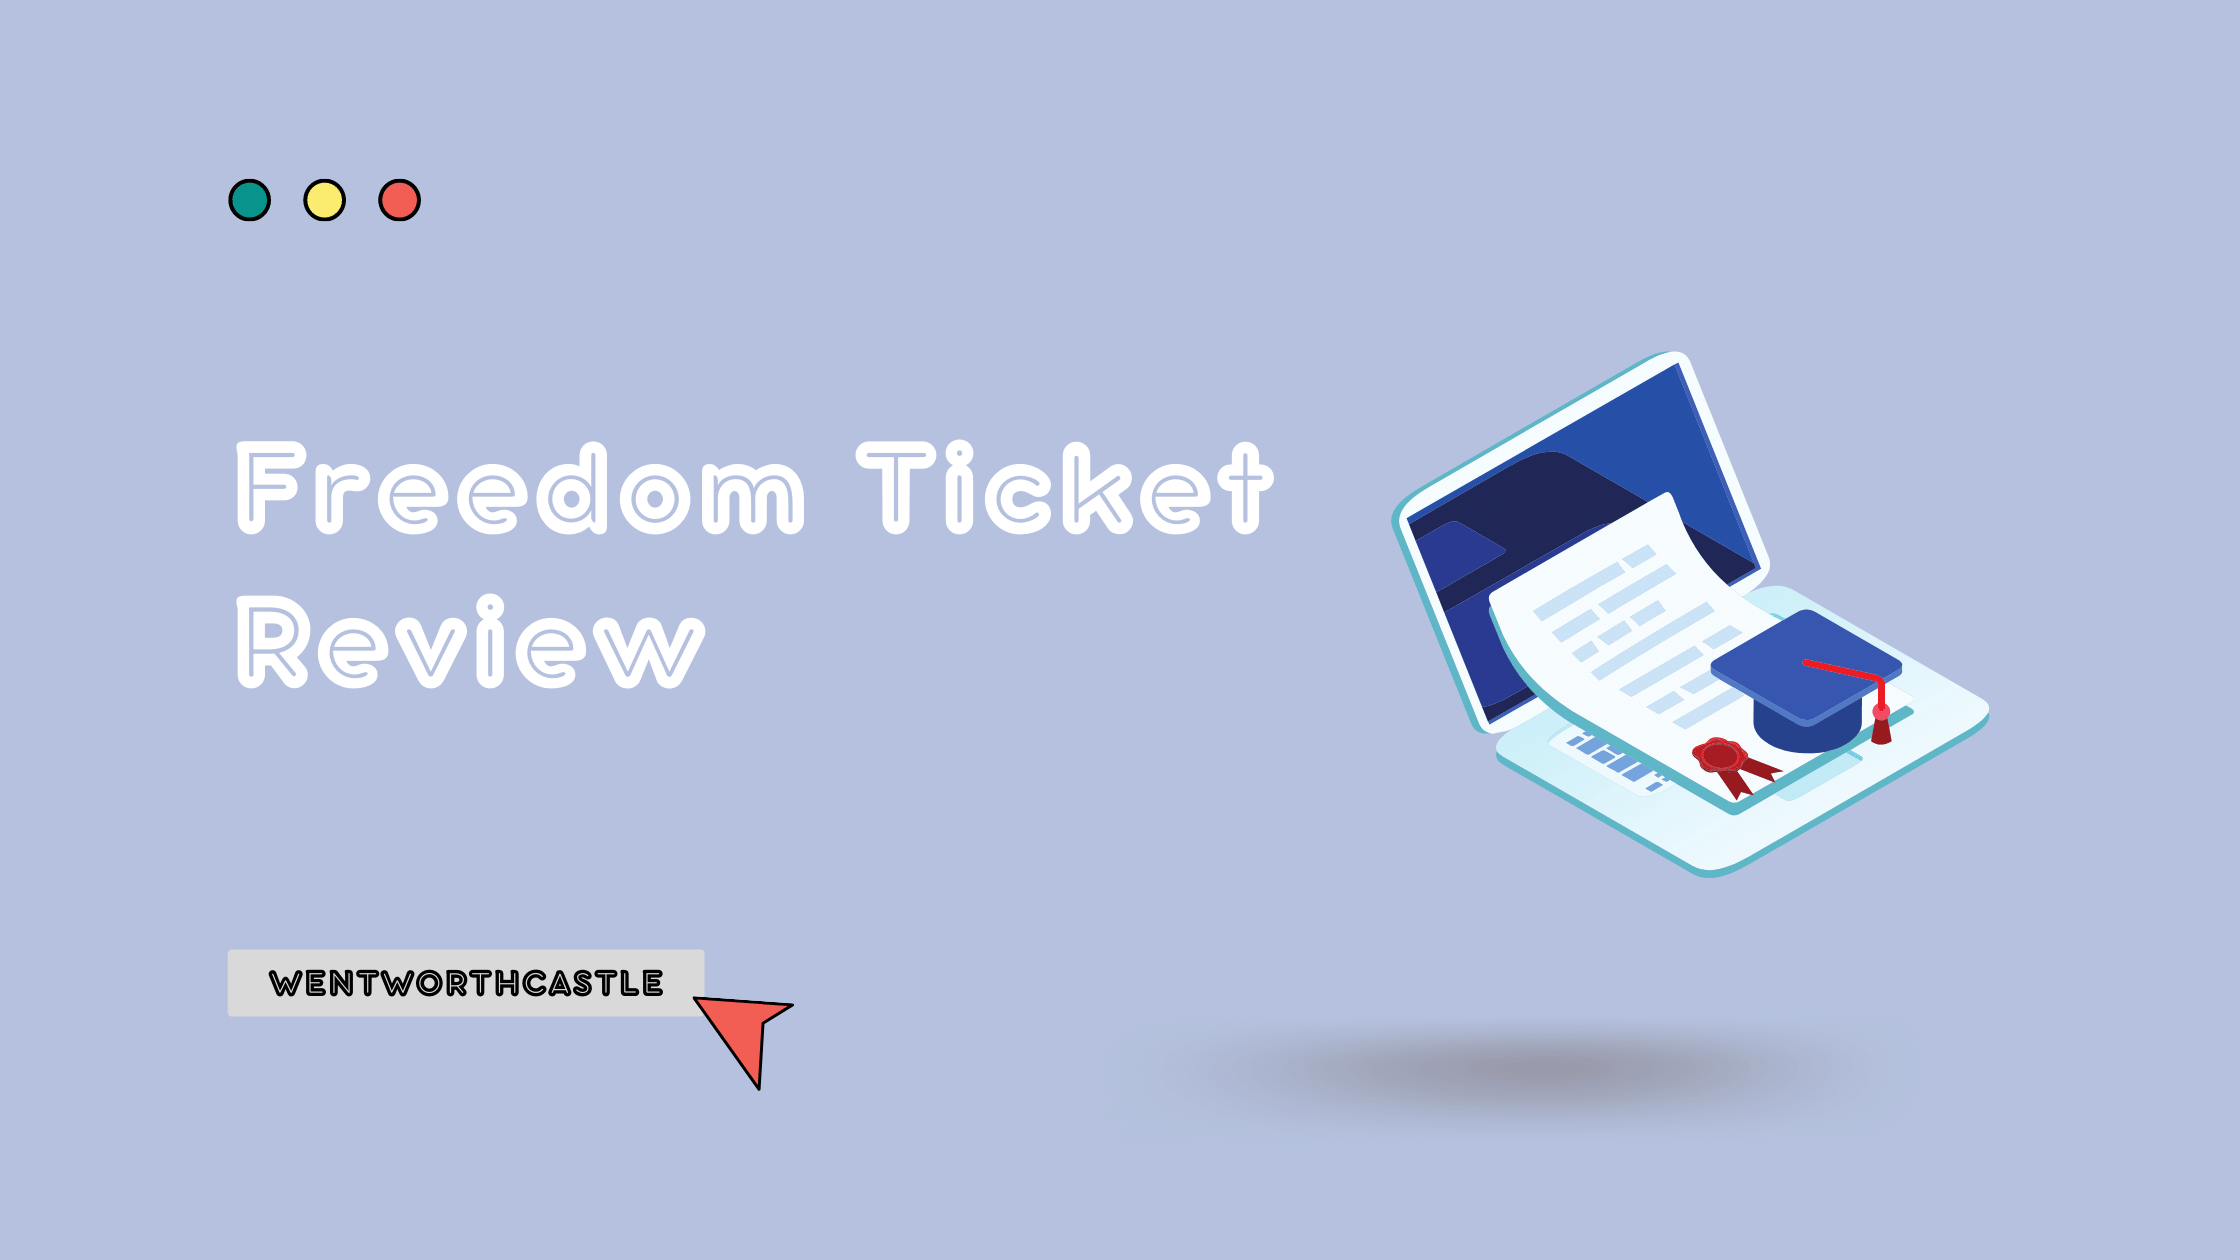 Freedom Ticket Review - WentWorthCastle